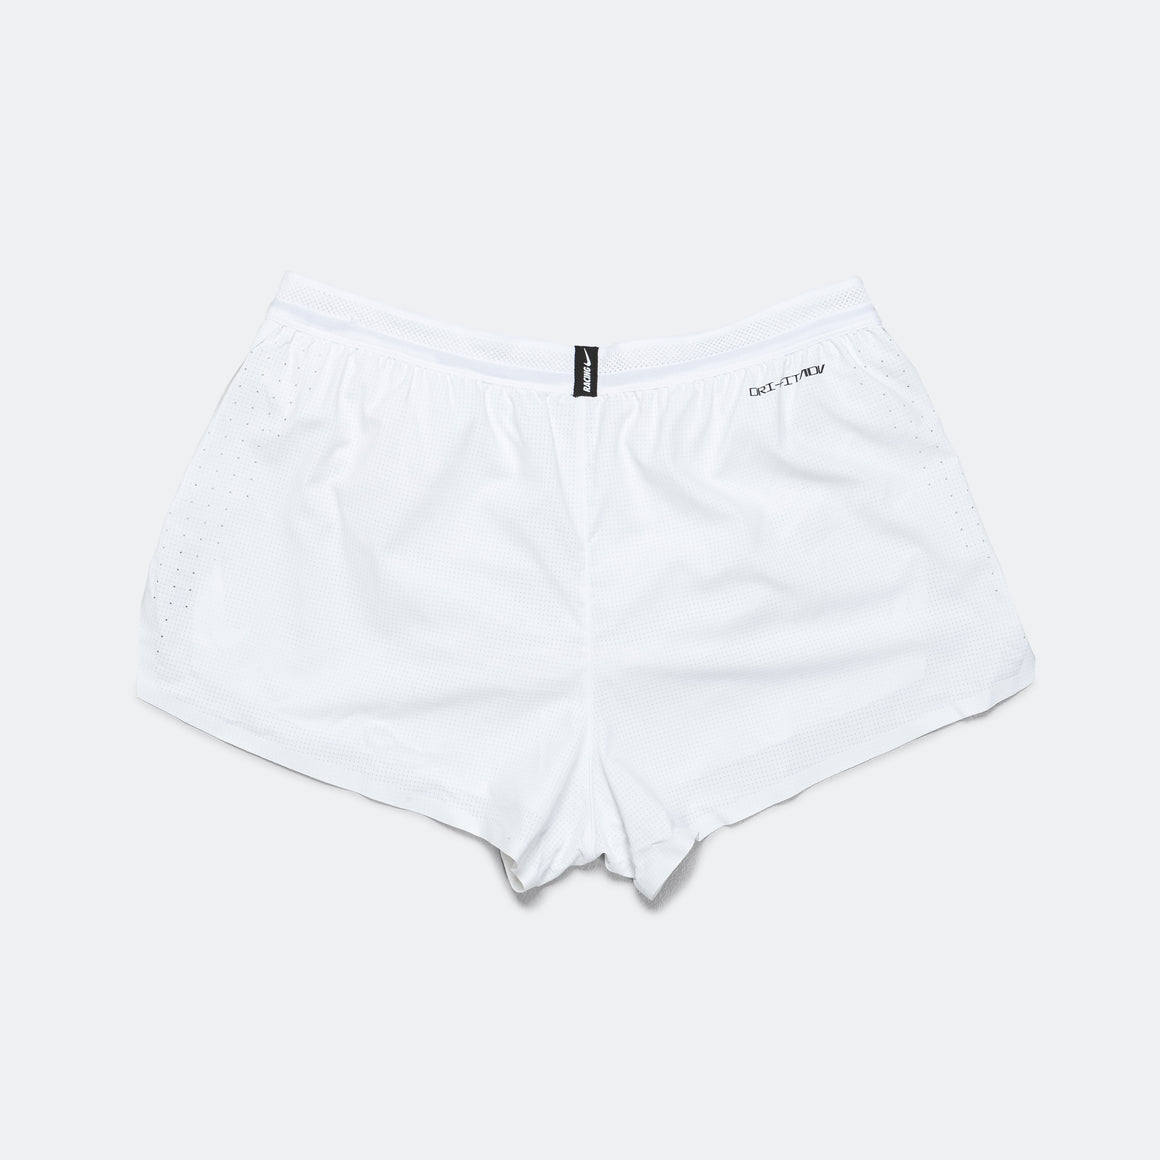 Nike - Mens 2" Brief Lined AeroSwift Racing Shorts - White/Polar - Up There Athletics